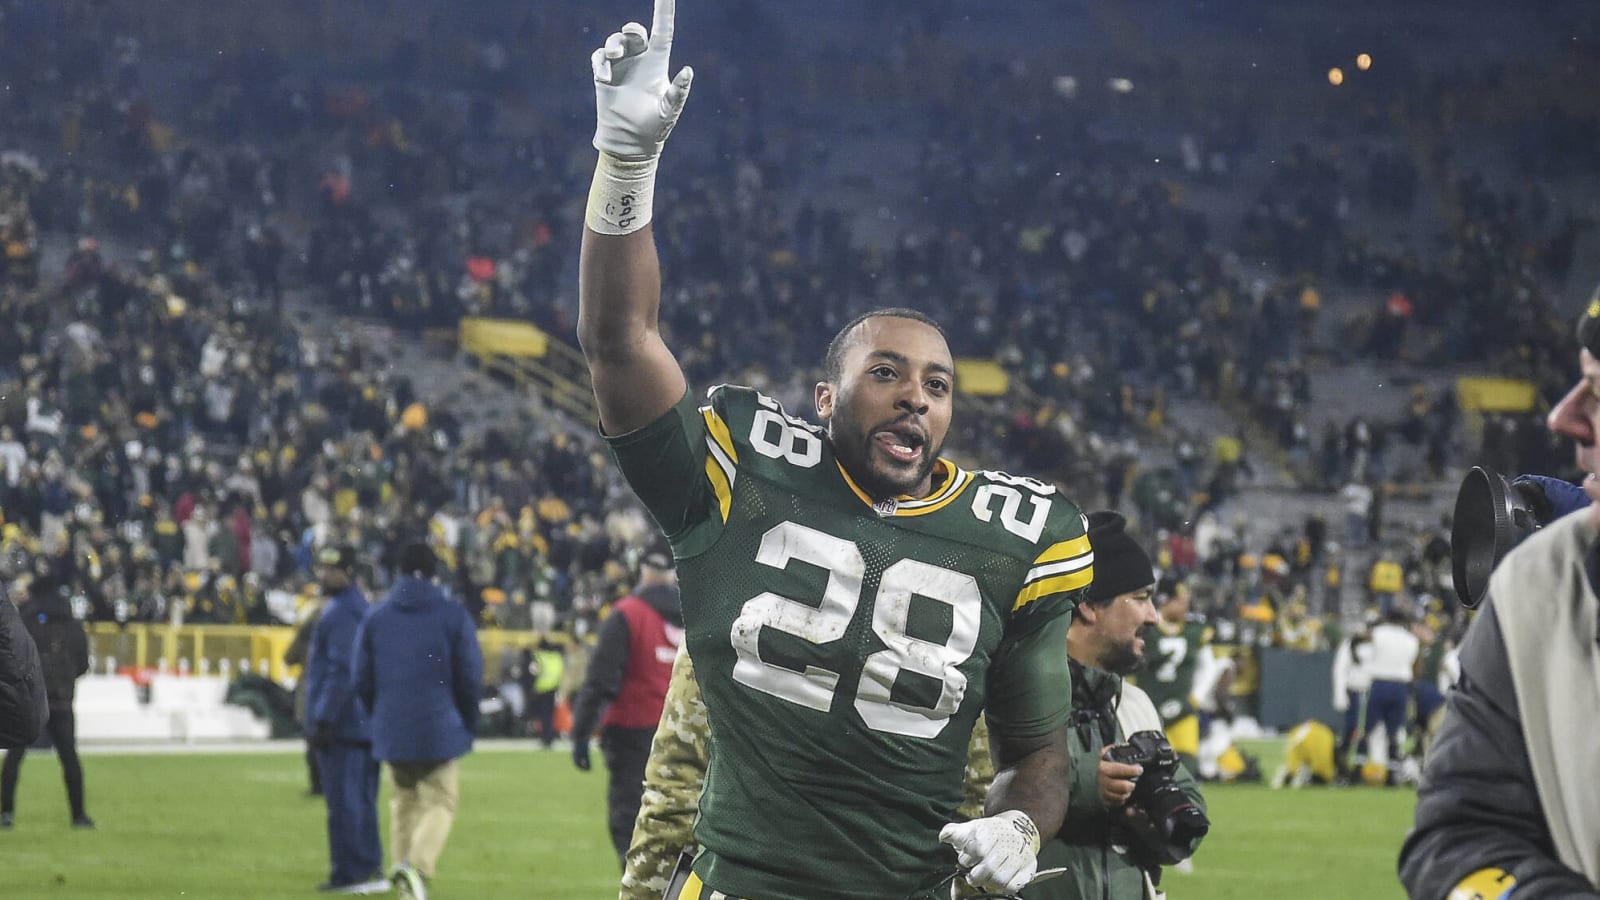 Packers running back AJ Dillon surprises cancer patients at Bellin